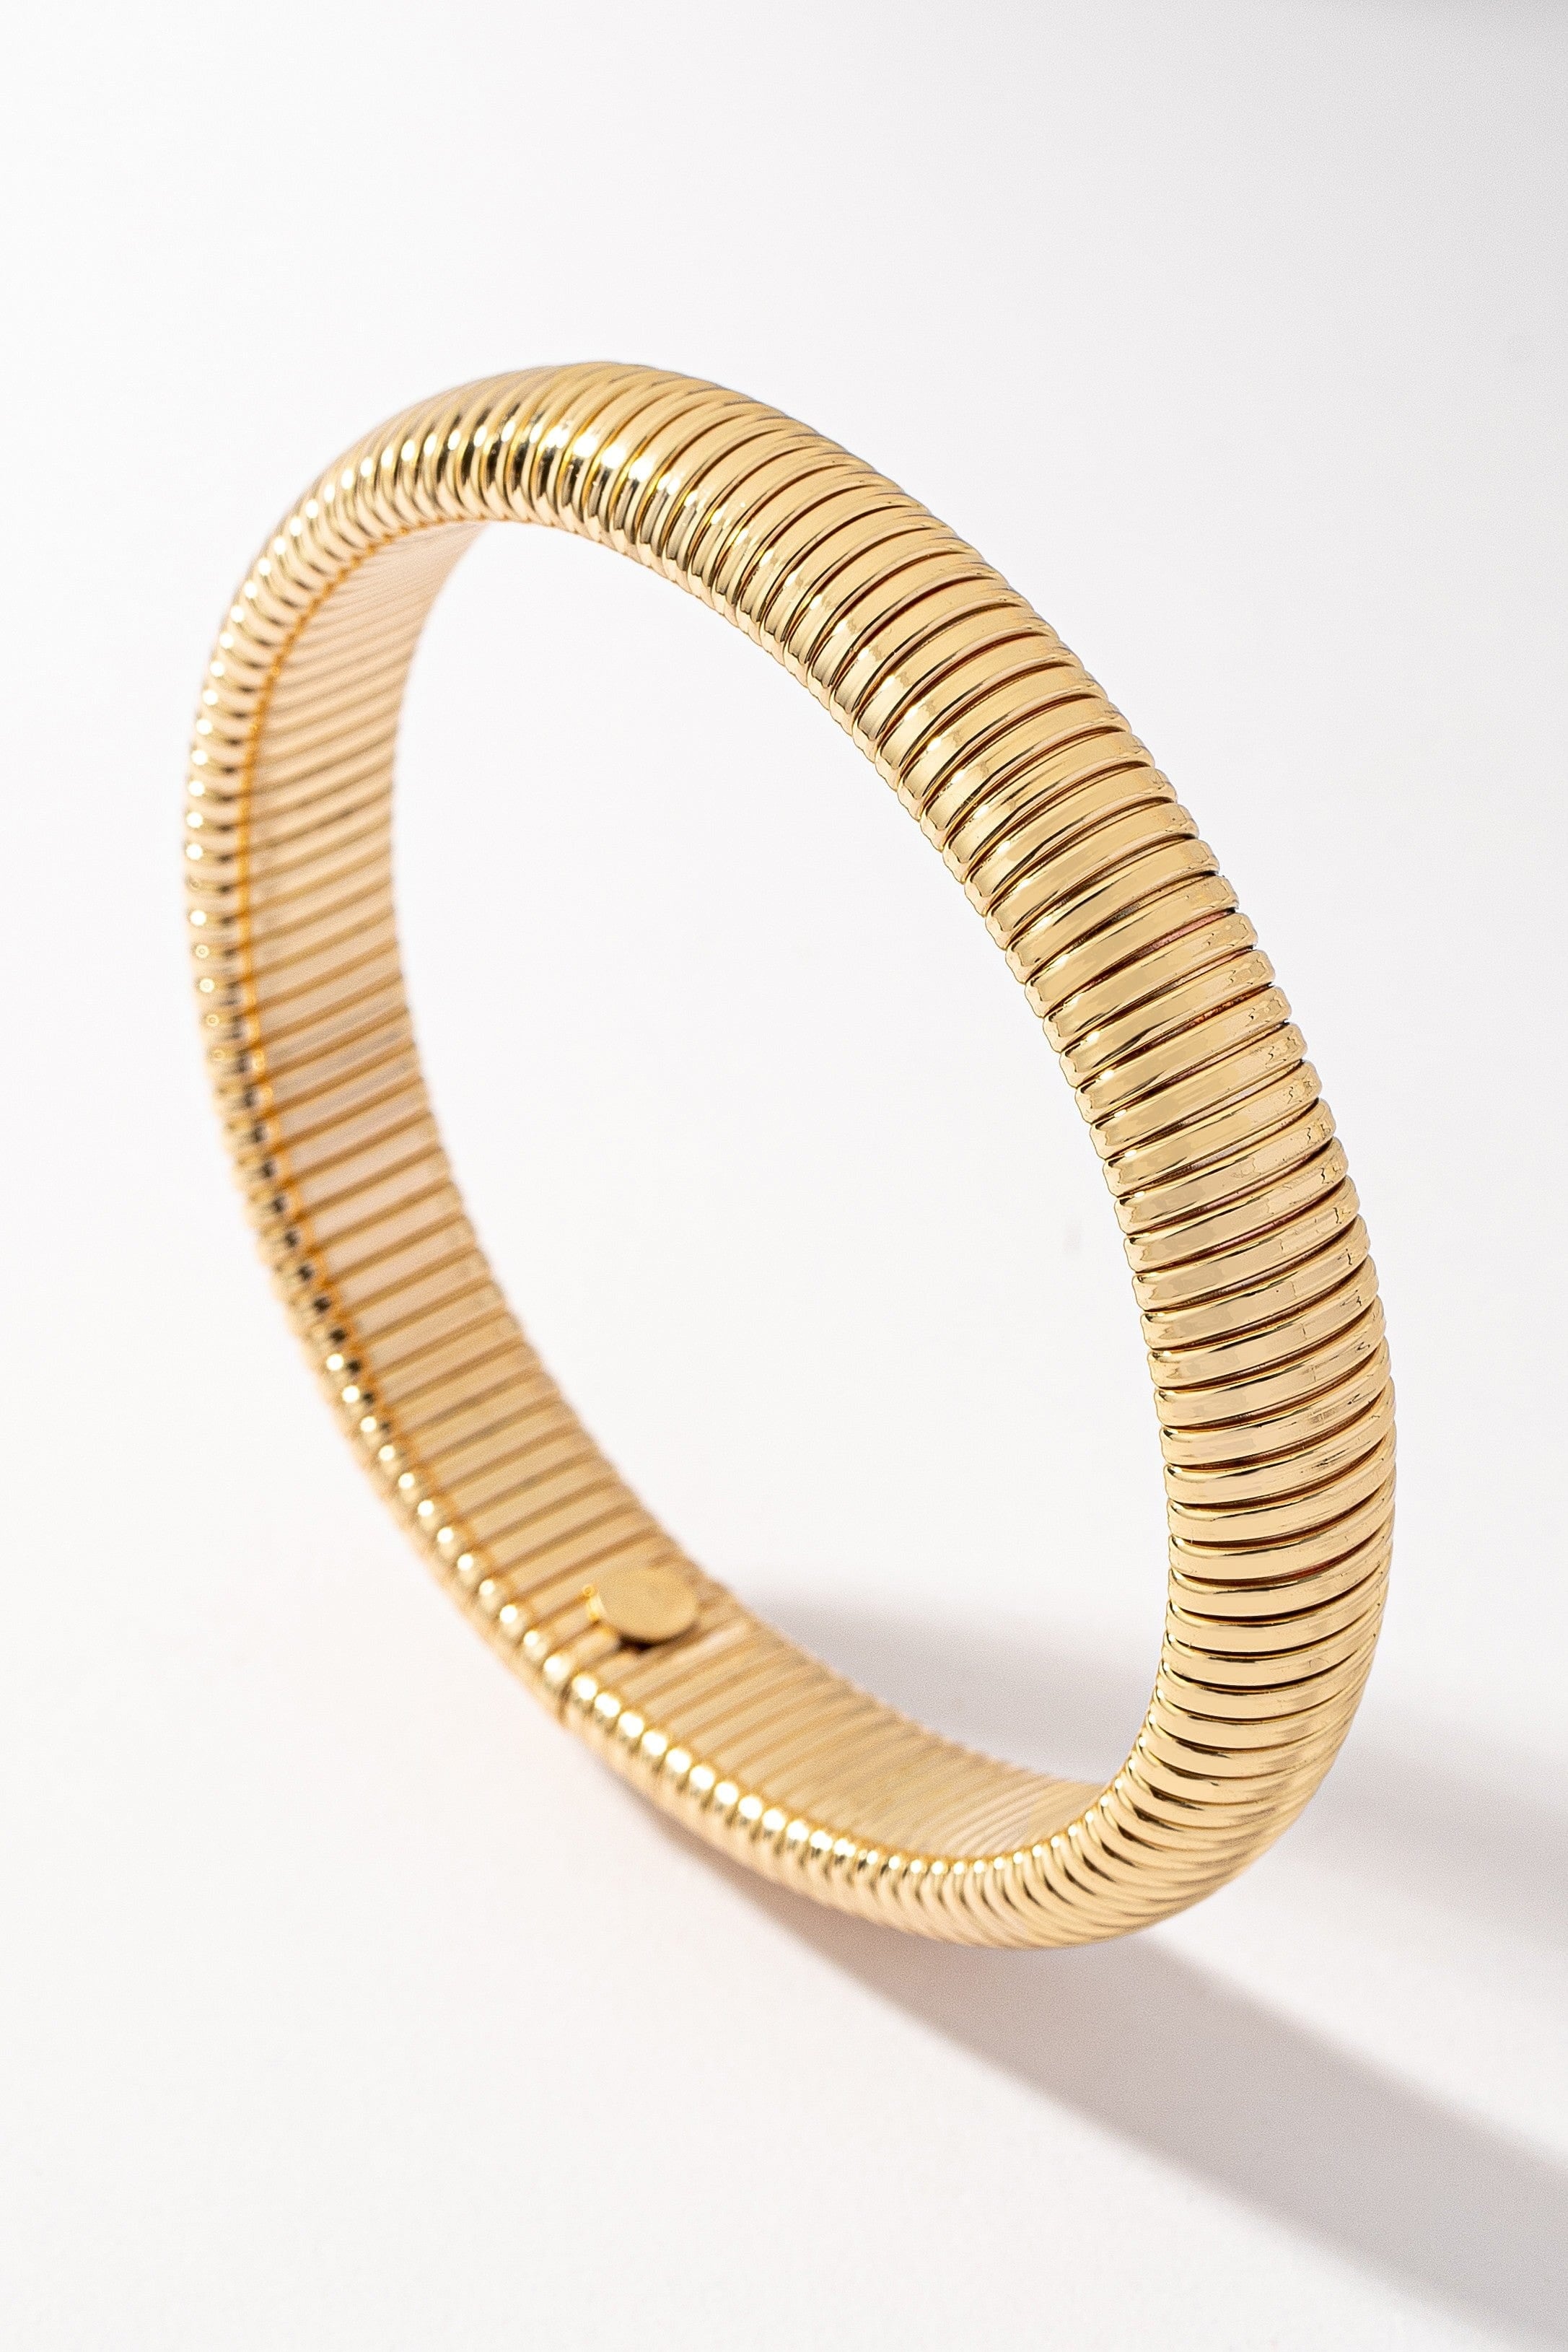 12mm Chunky Snake Chain Stretchy Bangle In Gold - Infinity Raine